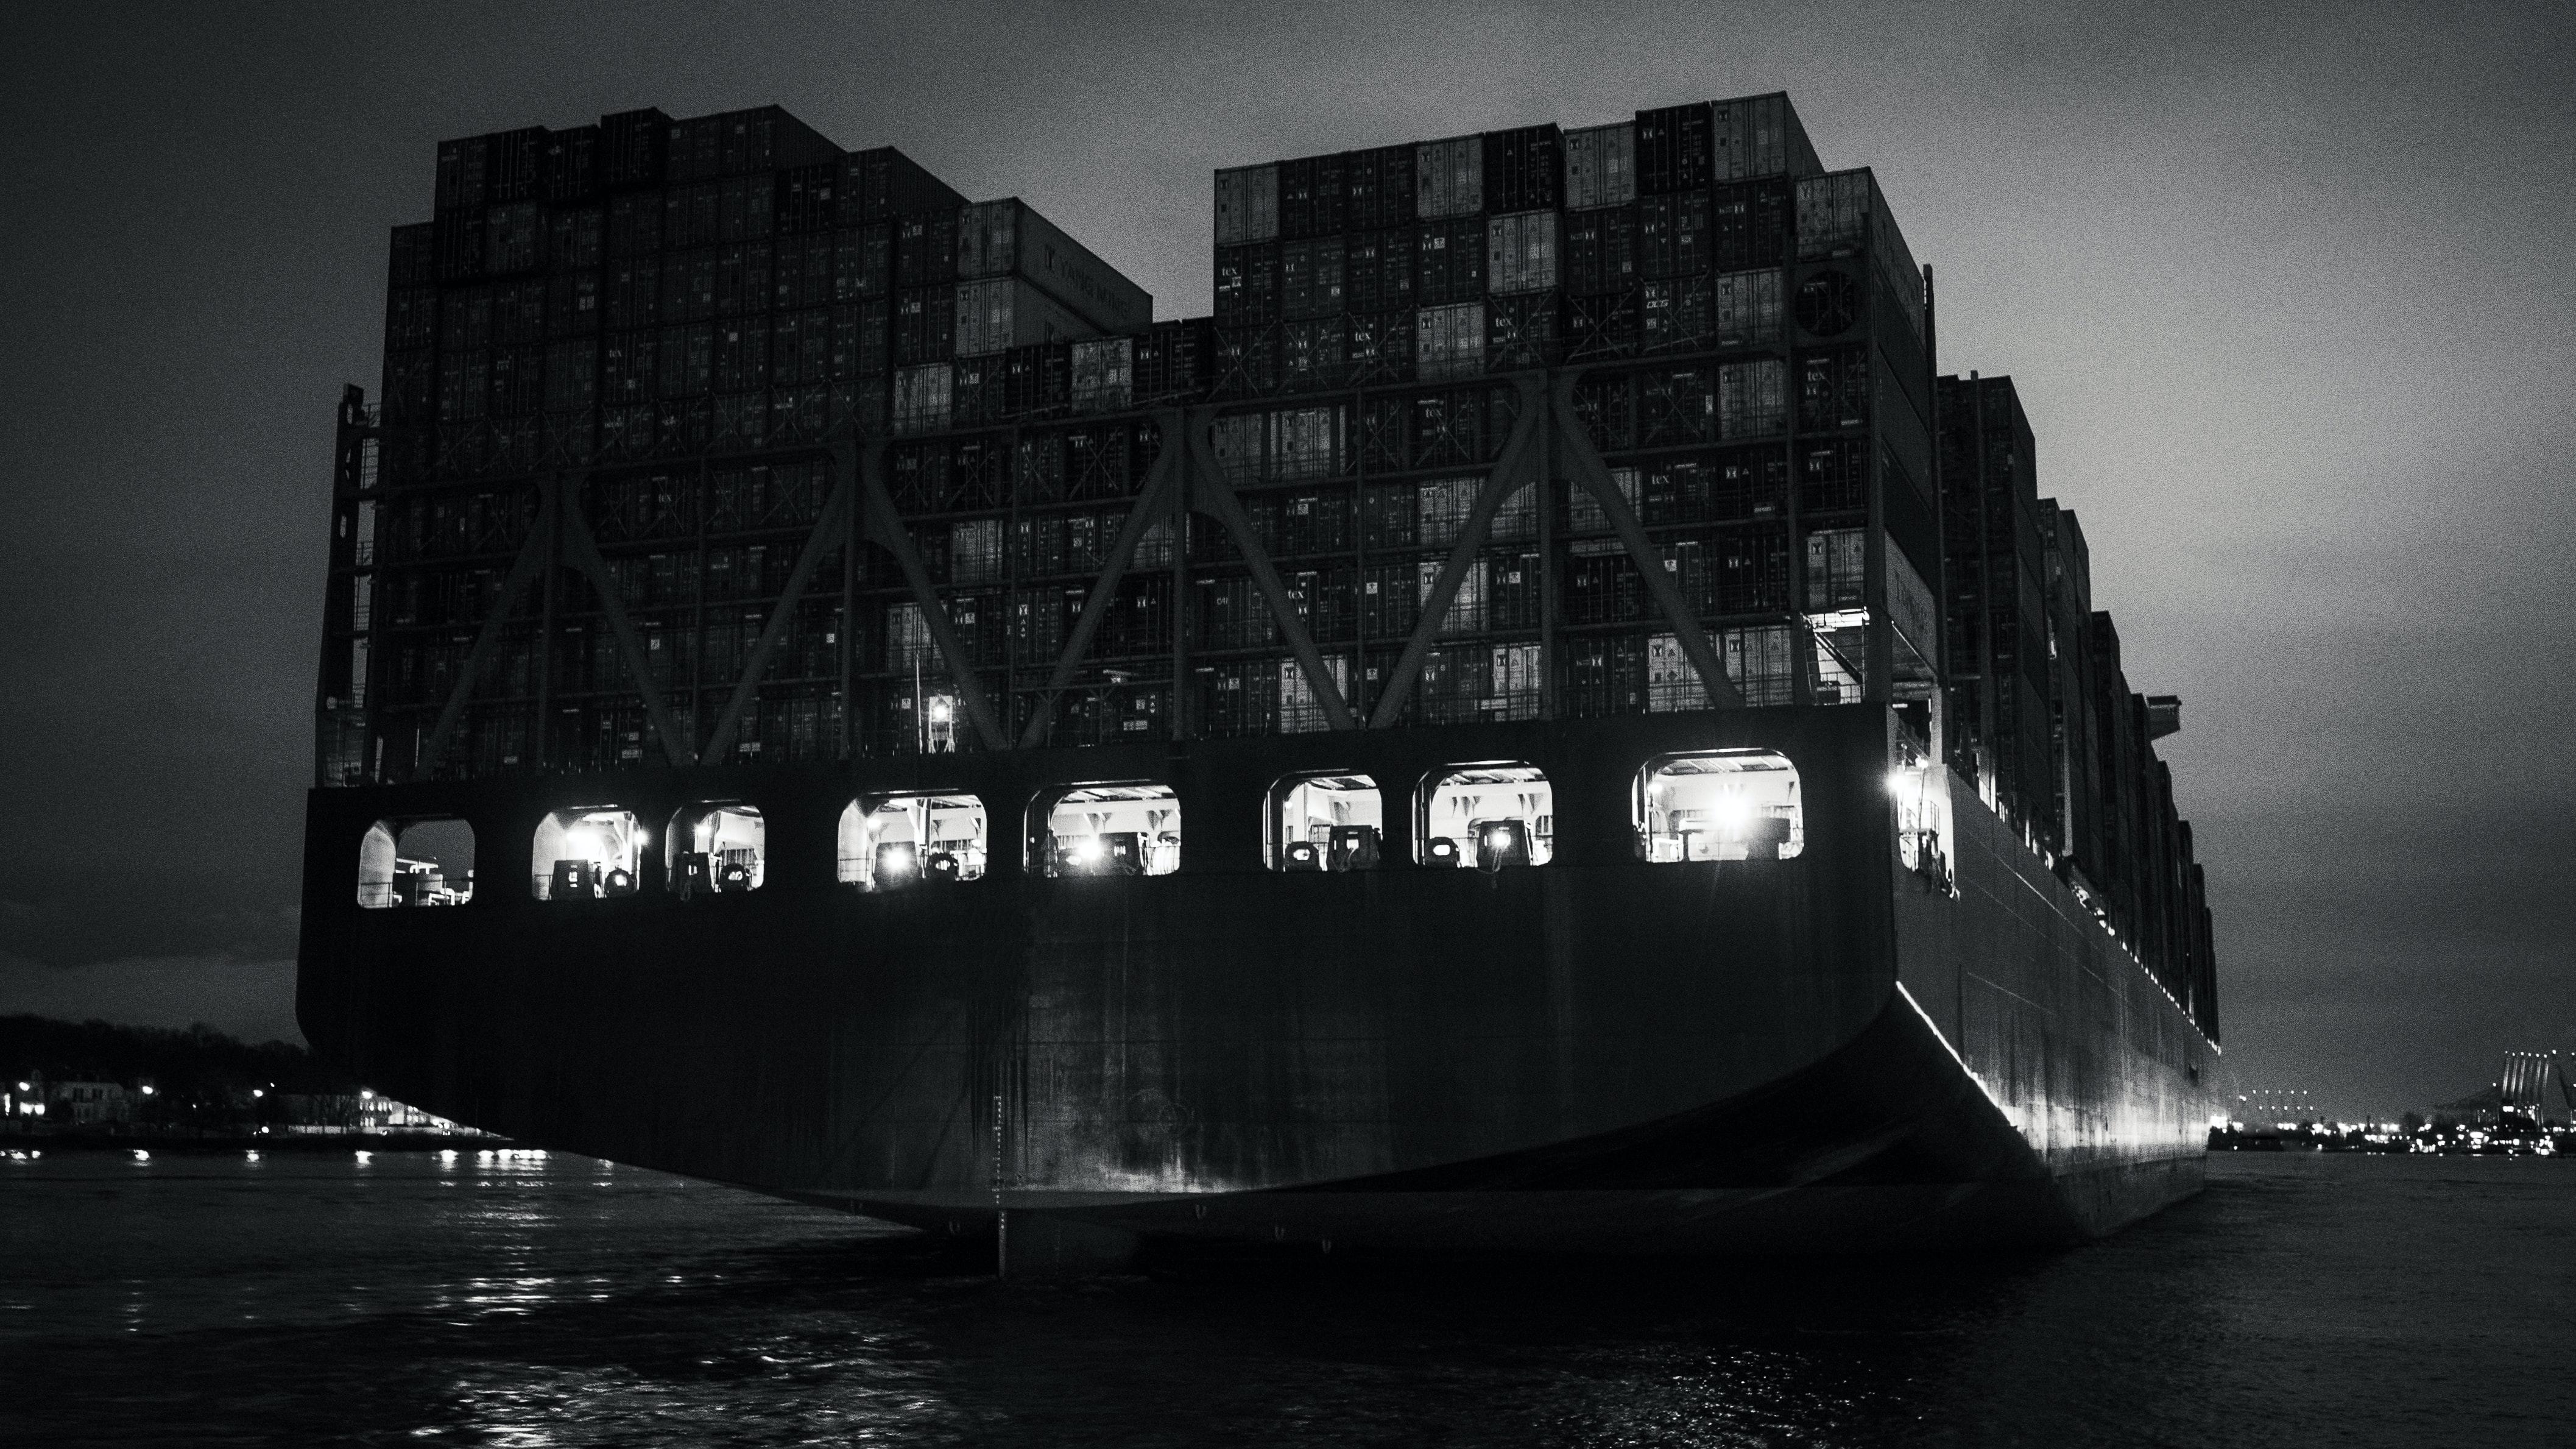 A black and white image of a container ship, viewed from the rear.